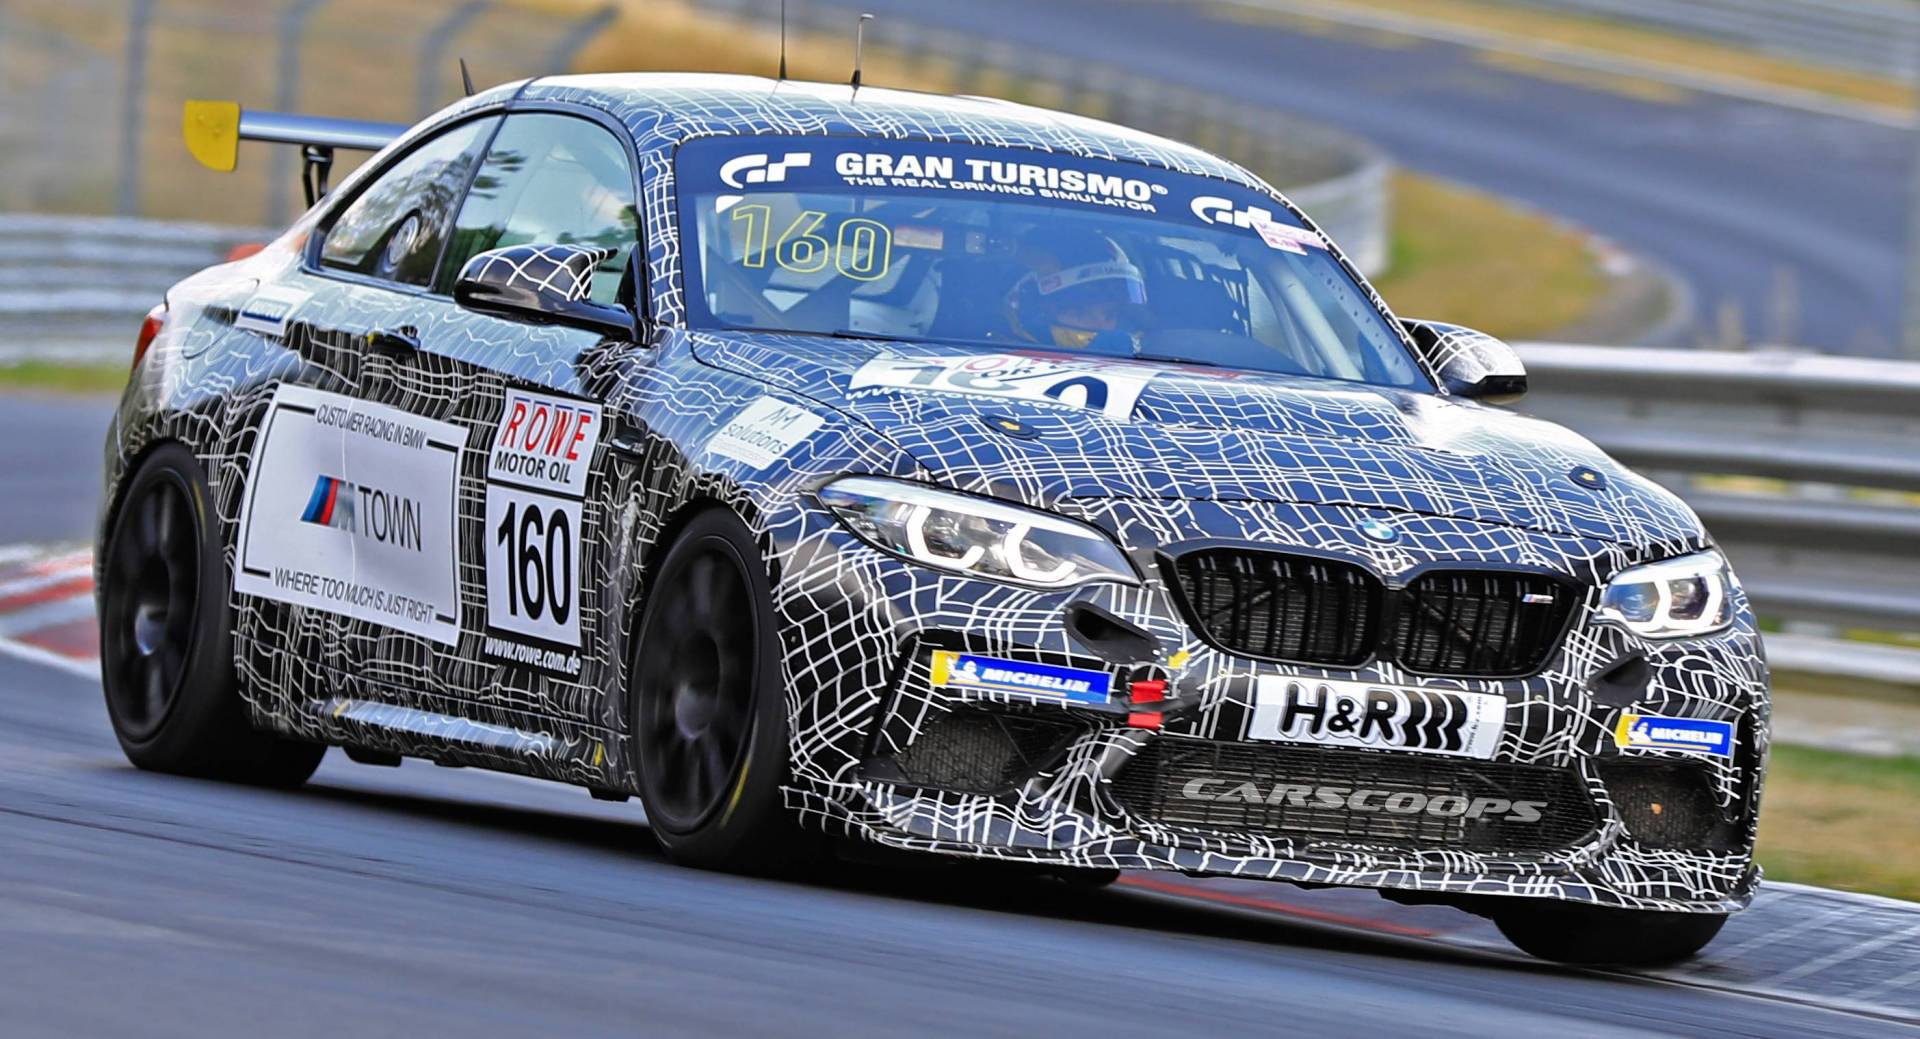 Bmw M2 Competition Racer Makes Its Debut Engineers Clearly Have More Work To Do Carscoops